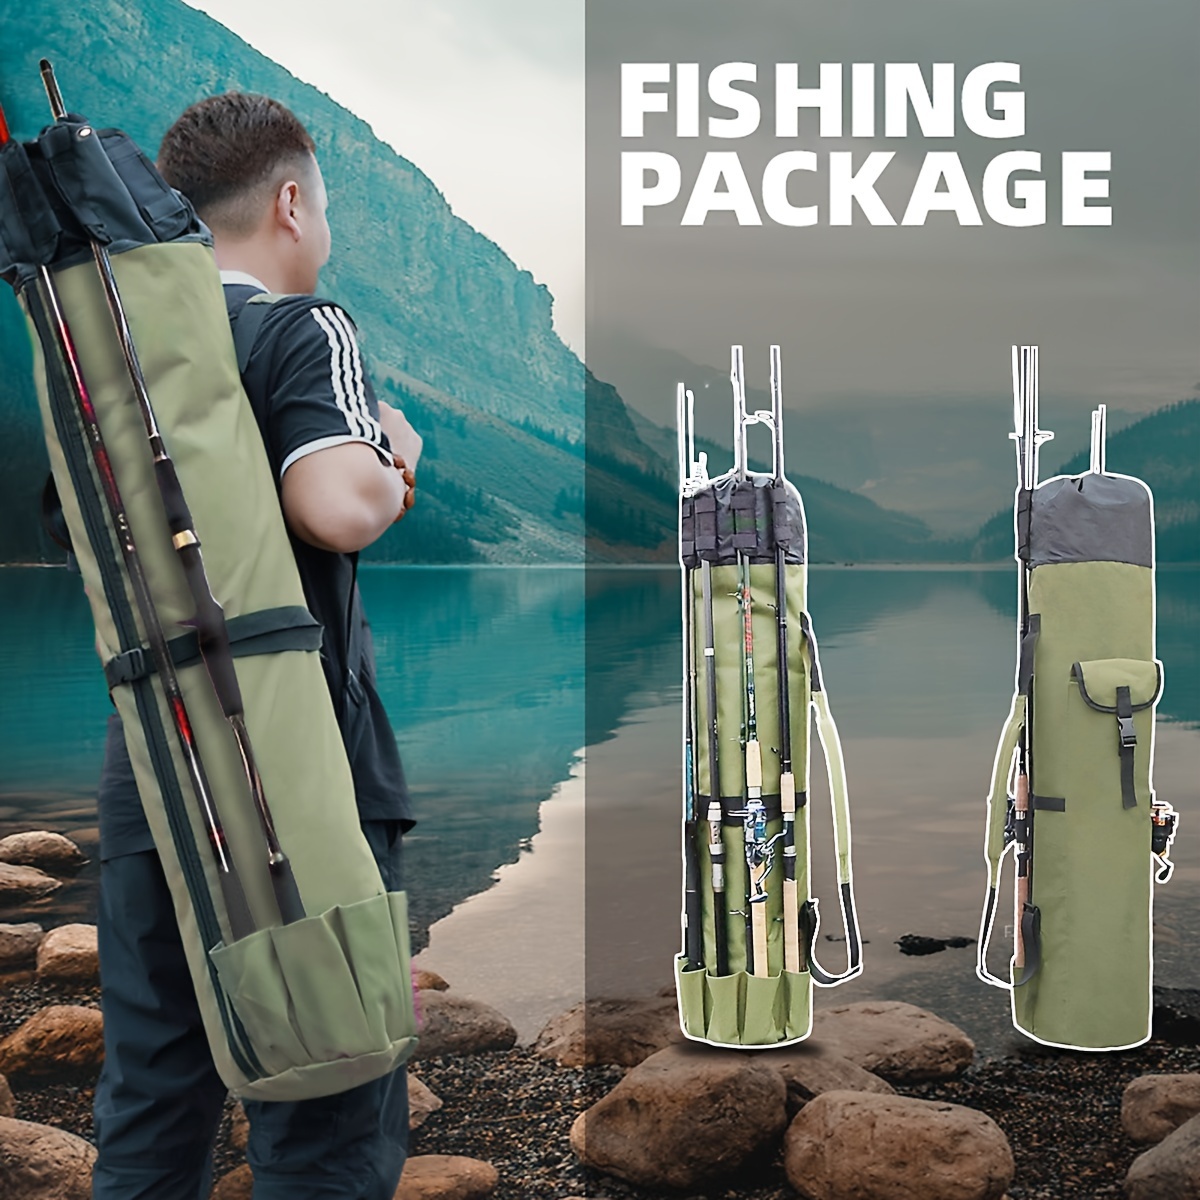 

Fishing Rod Organizer Bag (portable) Shoulder Carry Home And Travel Storage | Professional Reel, Tackle, And Equipment Organization | Heavy-duty, Water-resistant